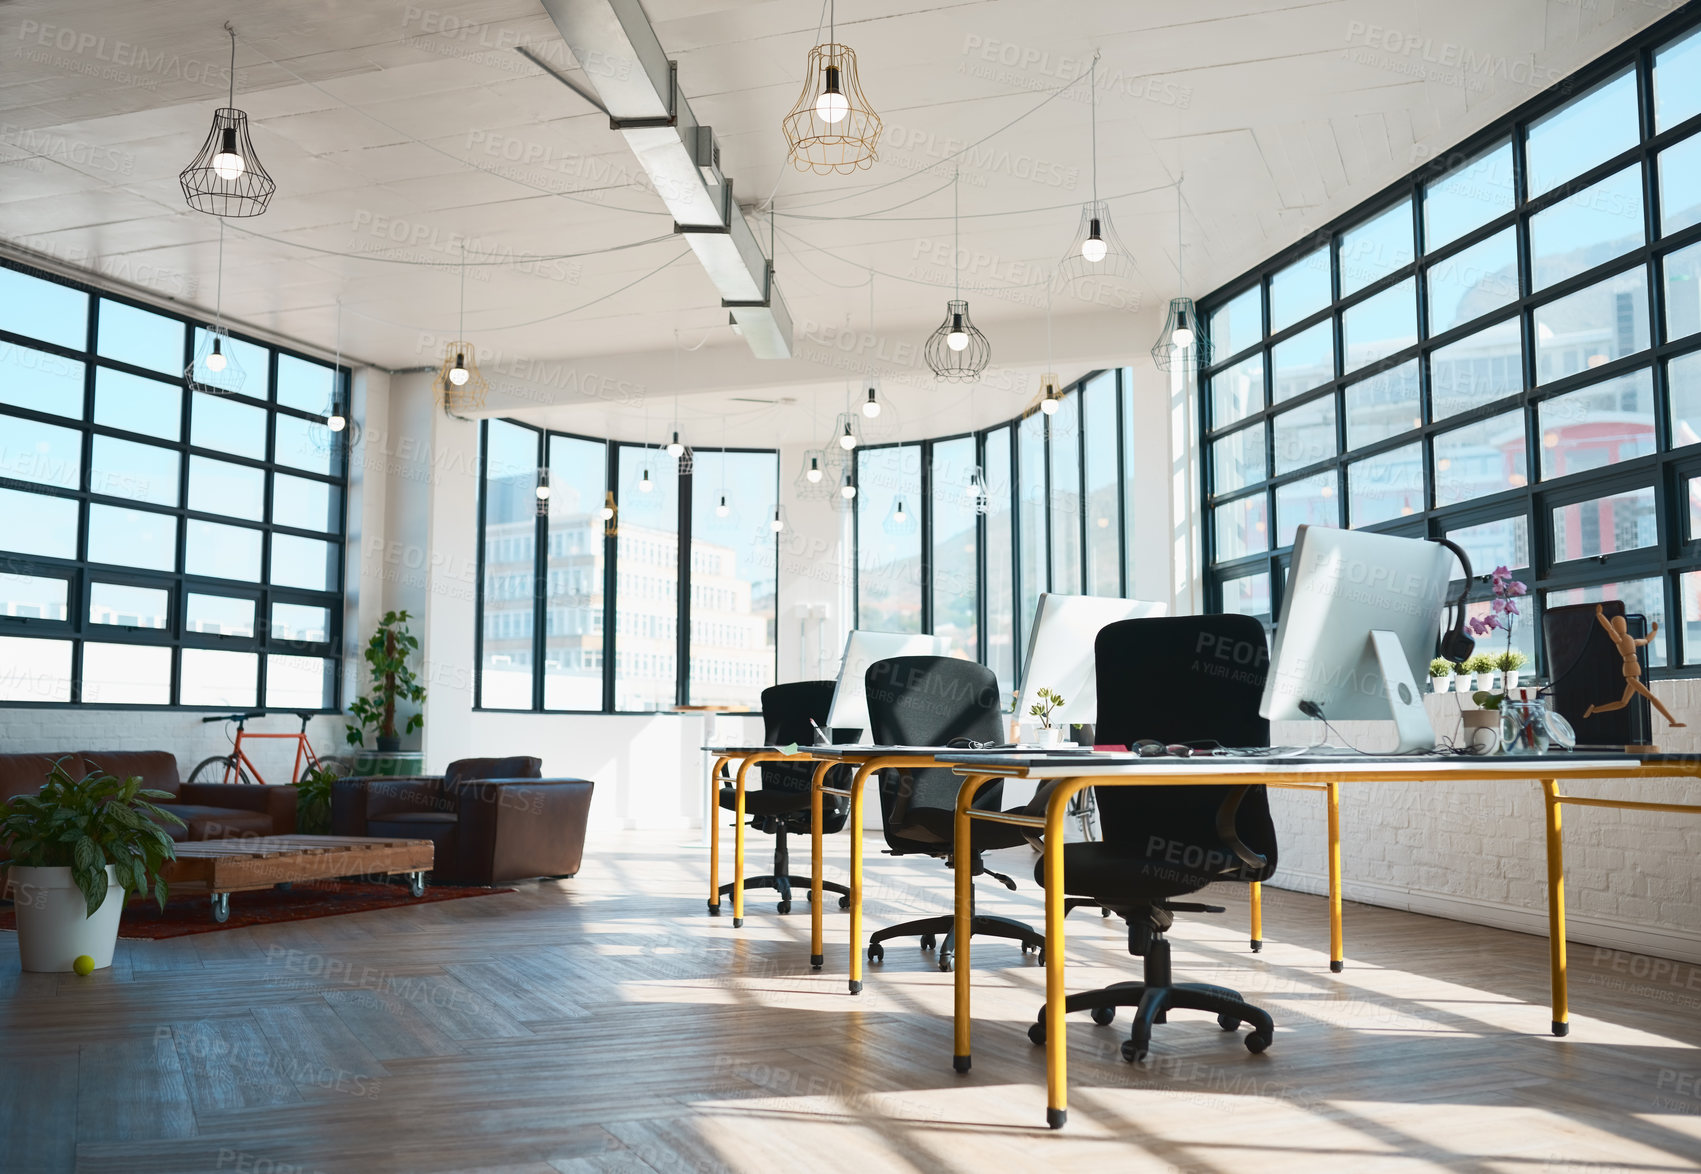 Buy stock photo Shot of a modern design office with no people in it